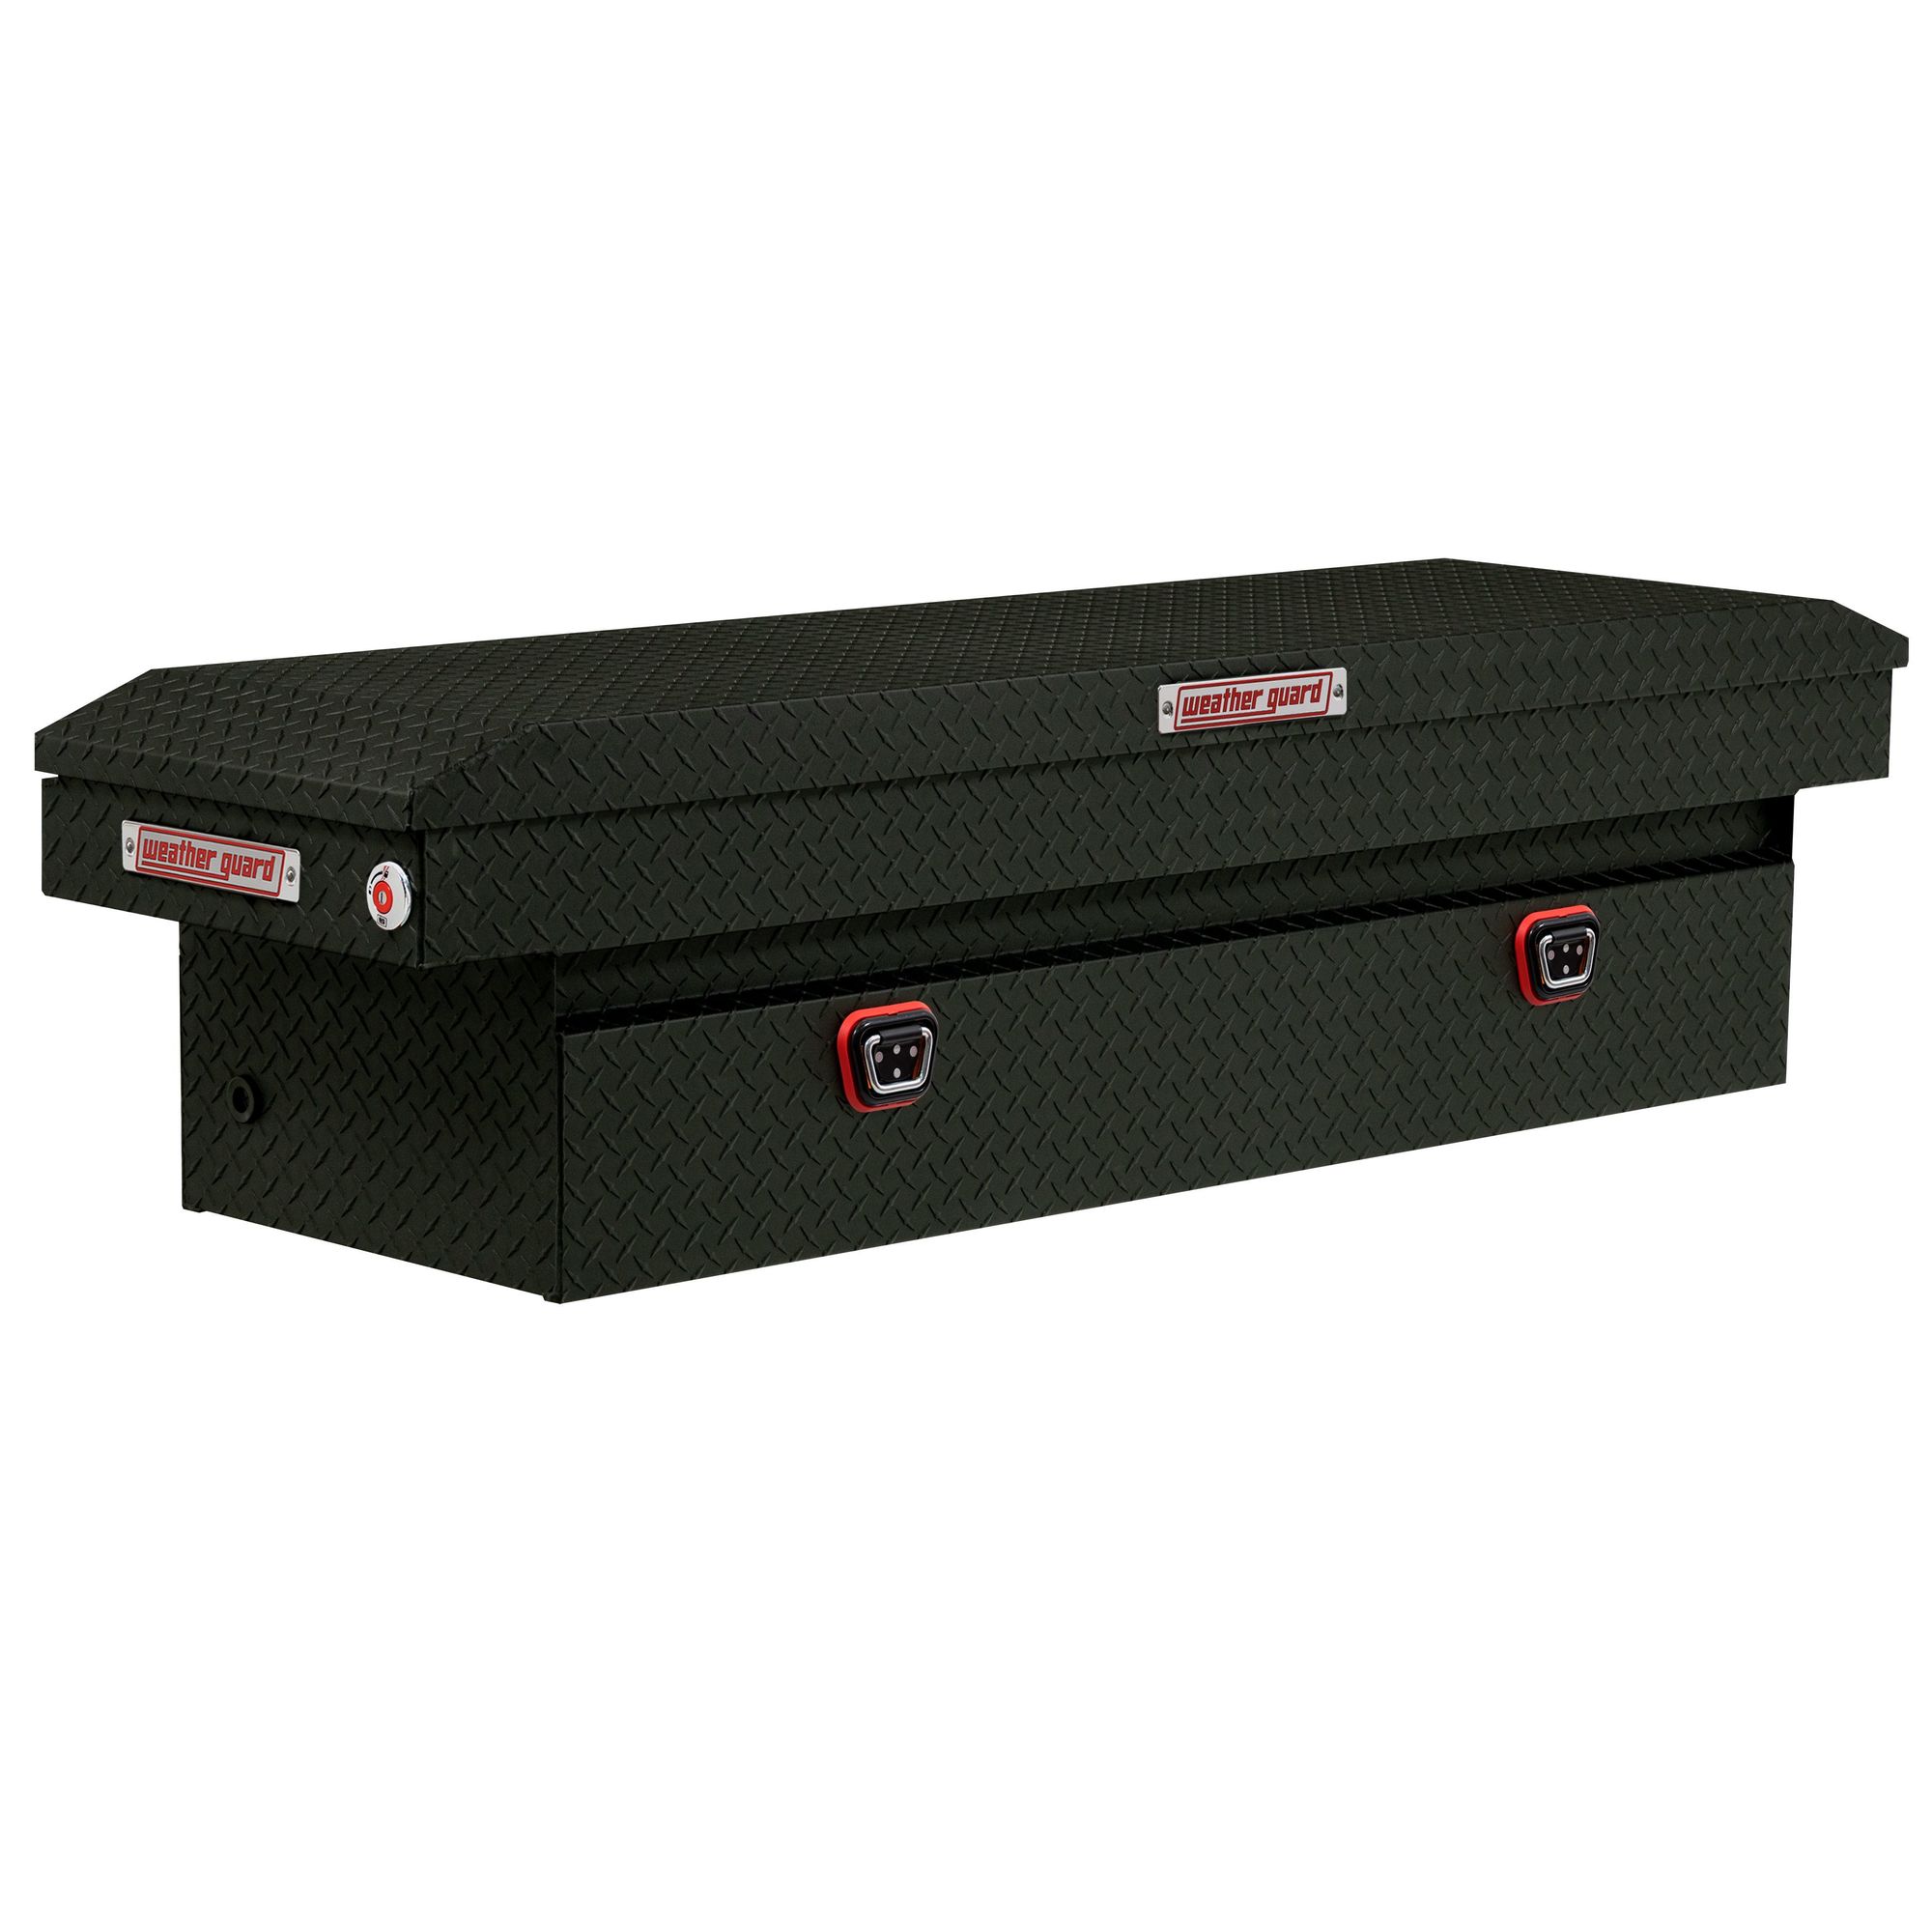 Weather Guard, 71Inch L Saddle Box, Full Standard, Width 72 in, Material Aluminum, Color Finish Textured Matte Black, Model 127-52-04